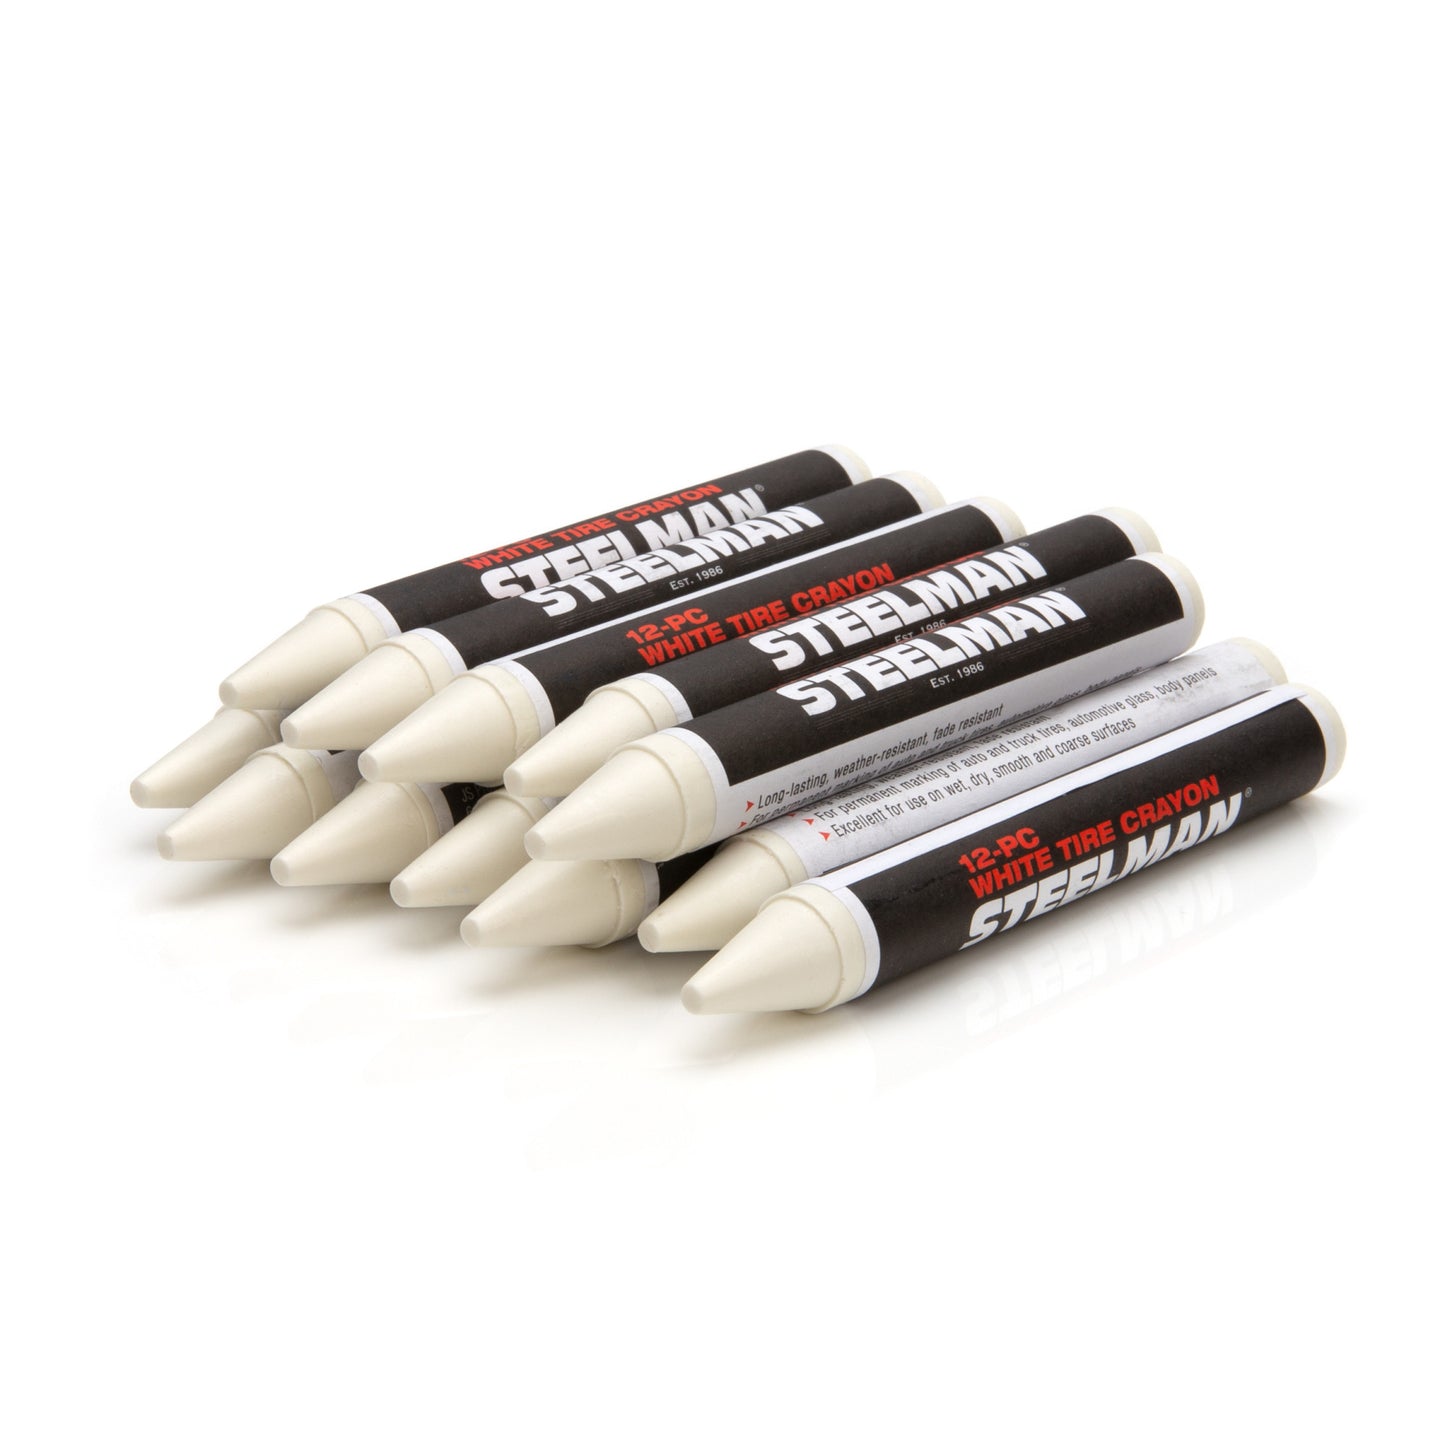 White Tire Marking Crayons, Box of 12